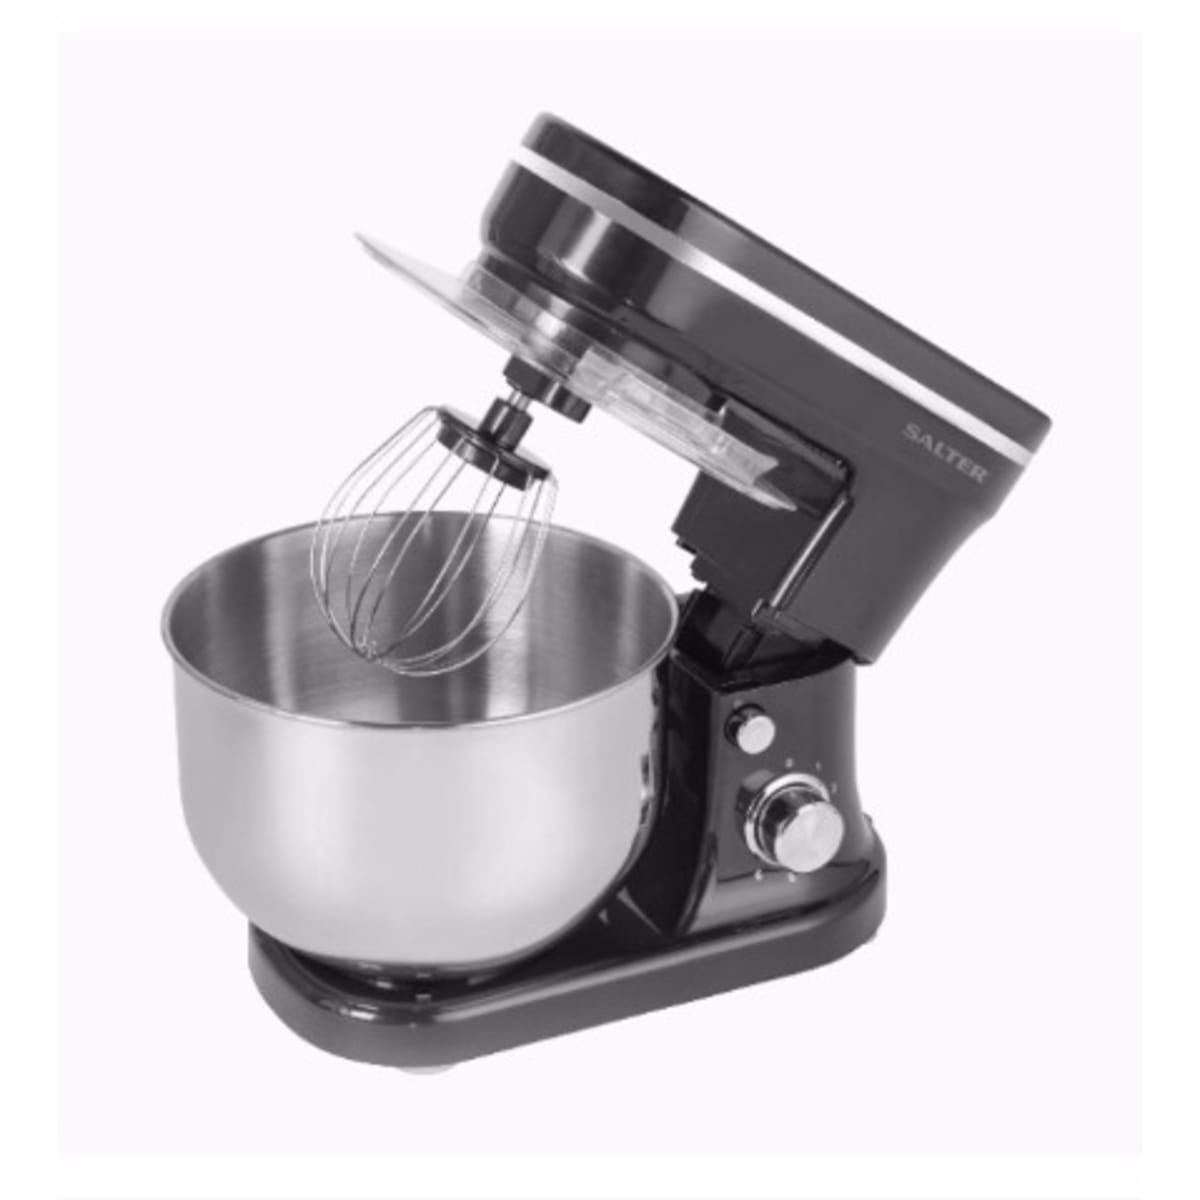 Electric Stand Mixer, 6-Speed Food Mixer W/ 5L Stainless Steel